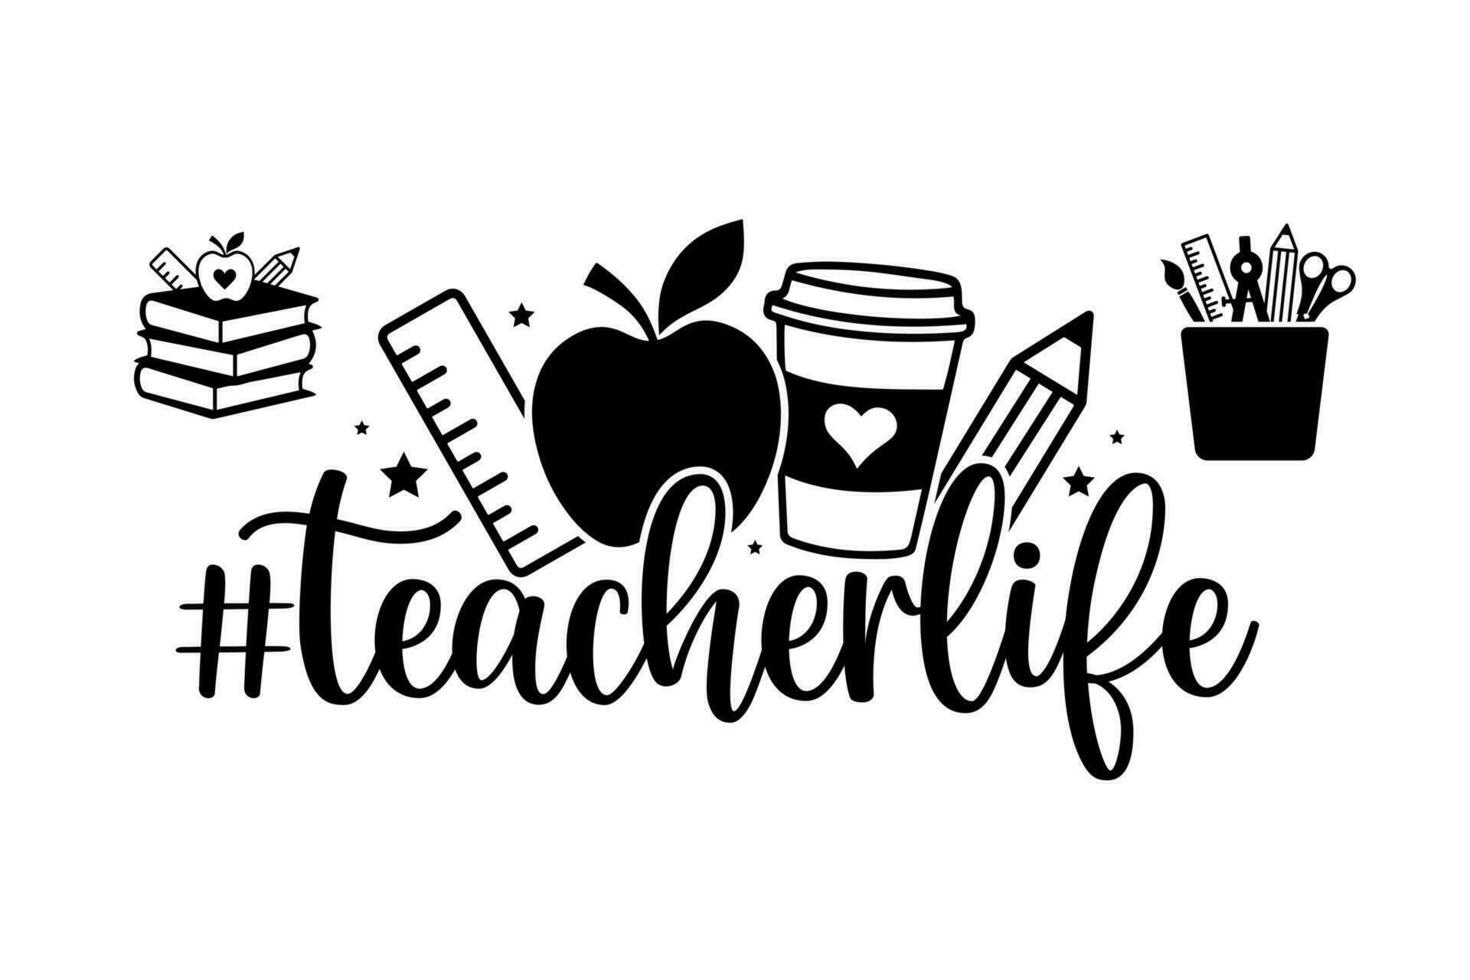 Teacher day quotes lettering school sayings typography back to school teacher student book heart monogram sign shirt quote vector